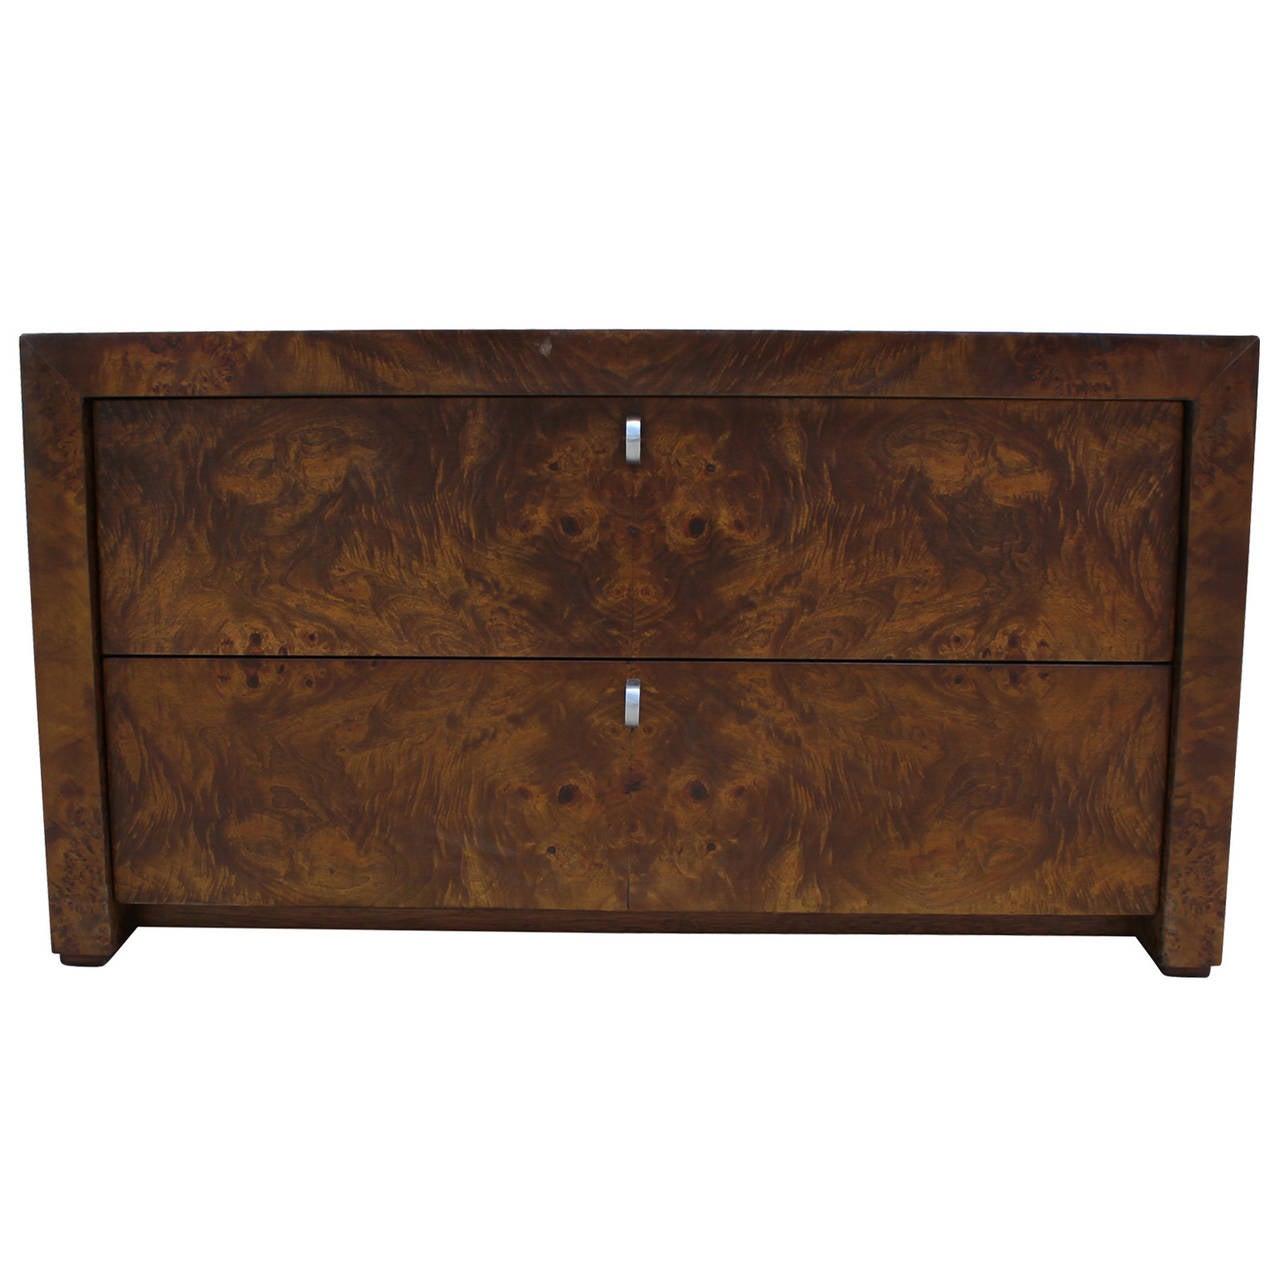 Beautiful chest in burl wood. Delicate, looped handles add visual interest. Chest has two drawers. Perfect as a side table or nightstand.